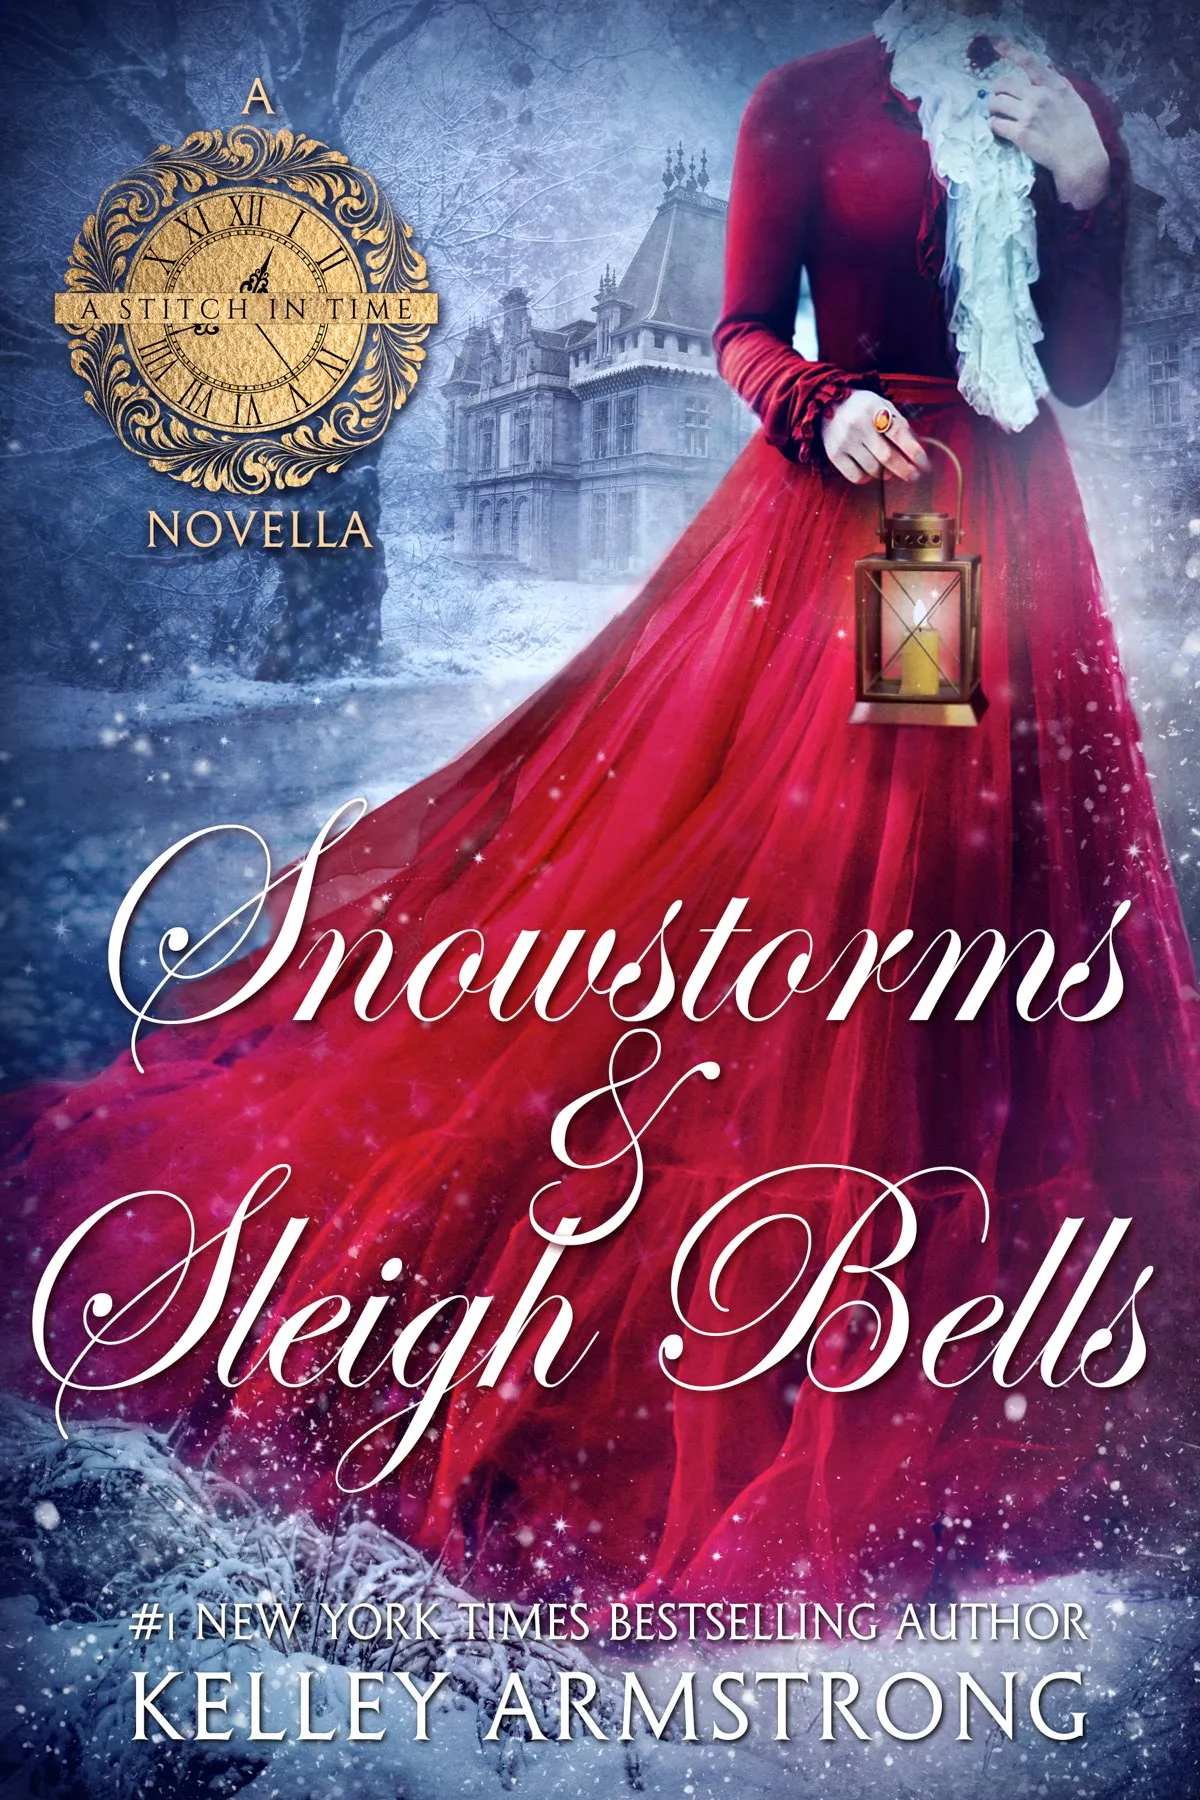 Snowstorms & Sleigh Bells (A Stitch in Time #2)